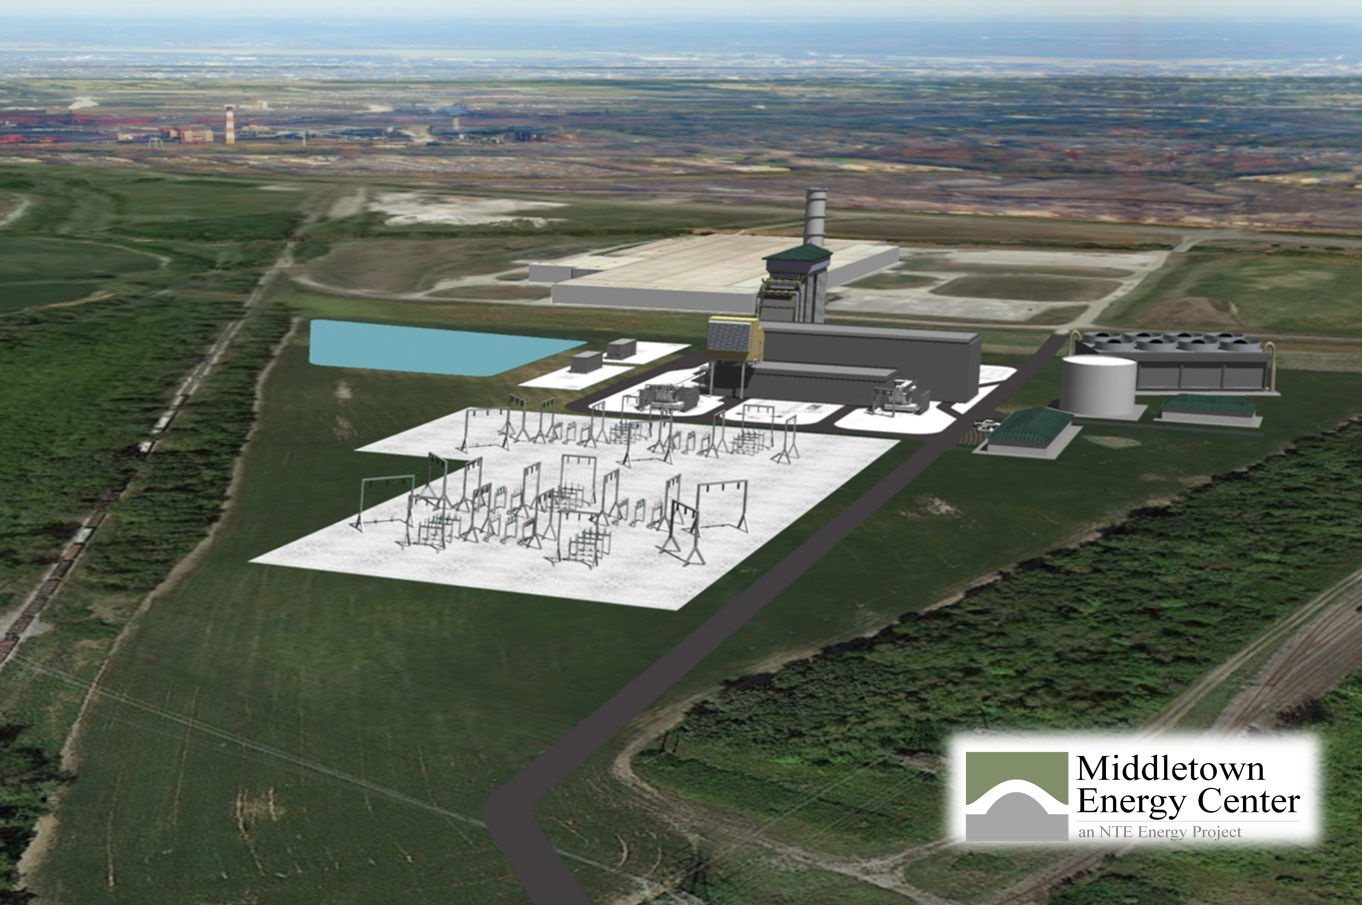 A projection of what the Middletown Energy Center will look like once construction is completed in 2018.